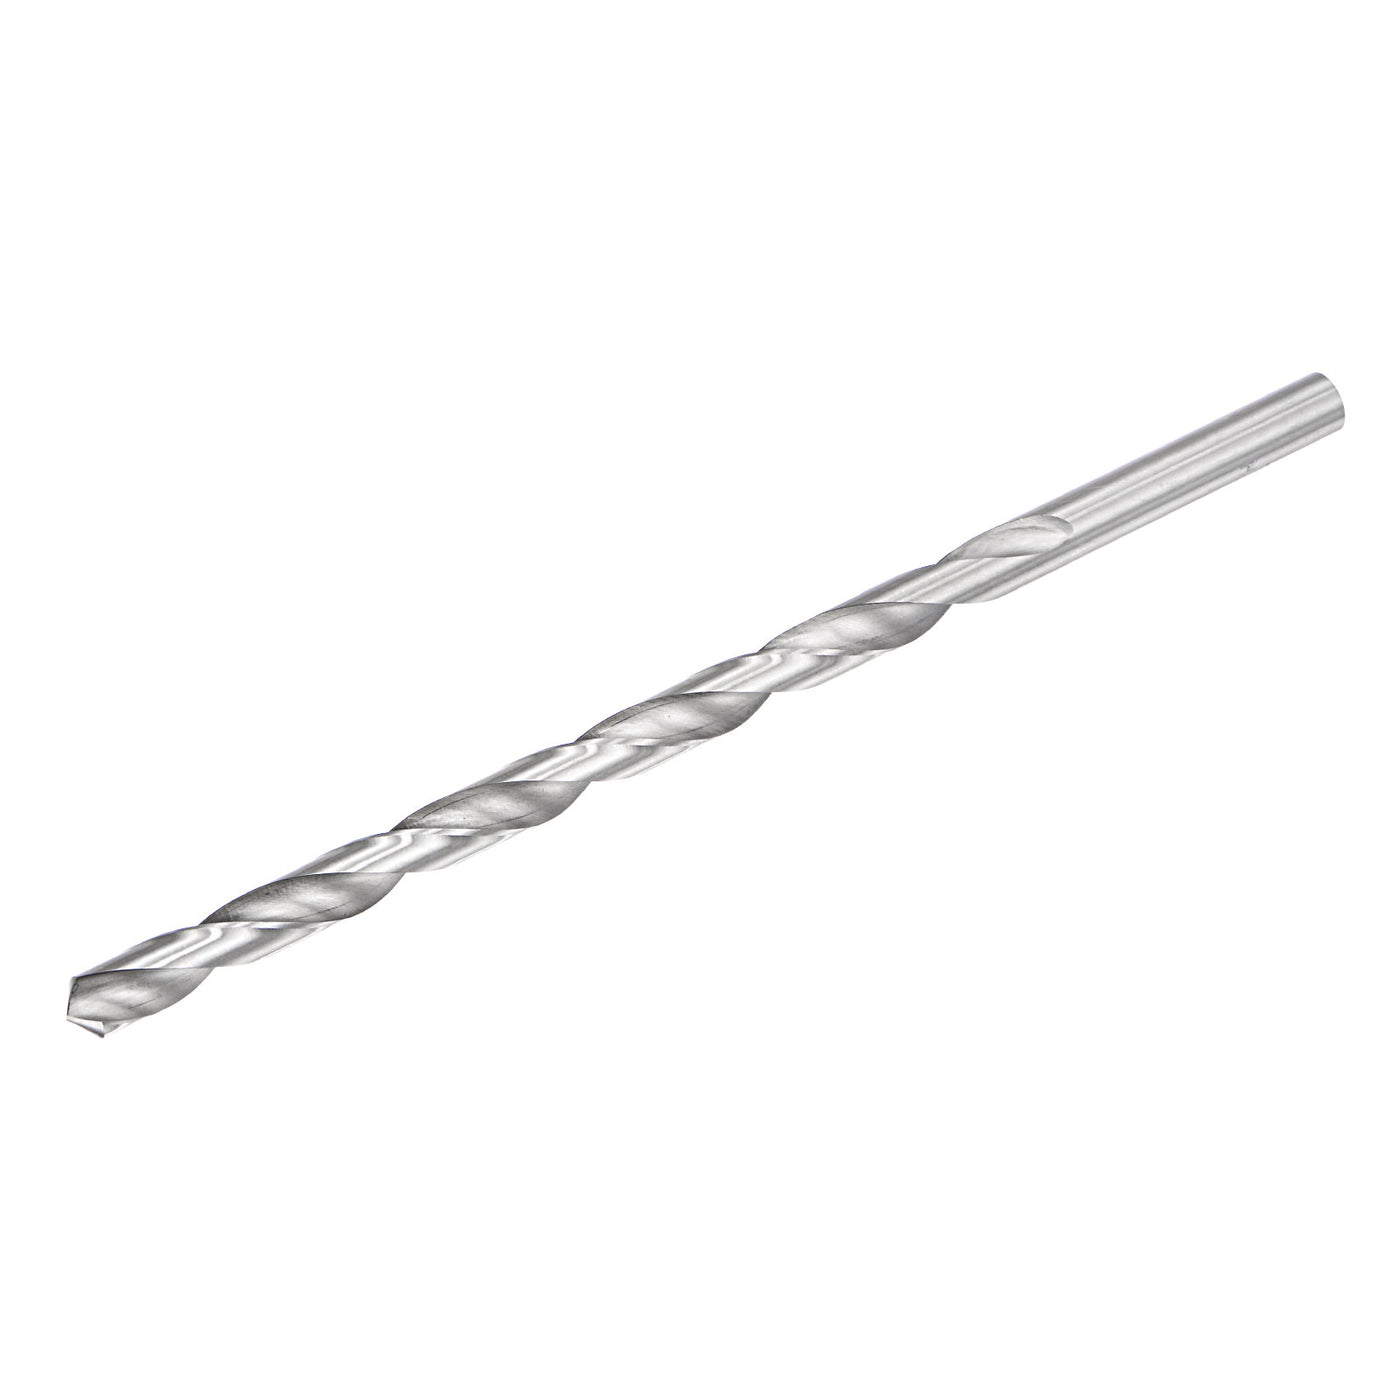 uxcell Uxcell 9mm Twist Drill Bits, High-Speed Steel Extra Long Drill Bit 200mm Length